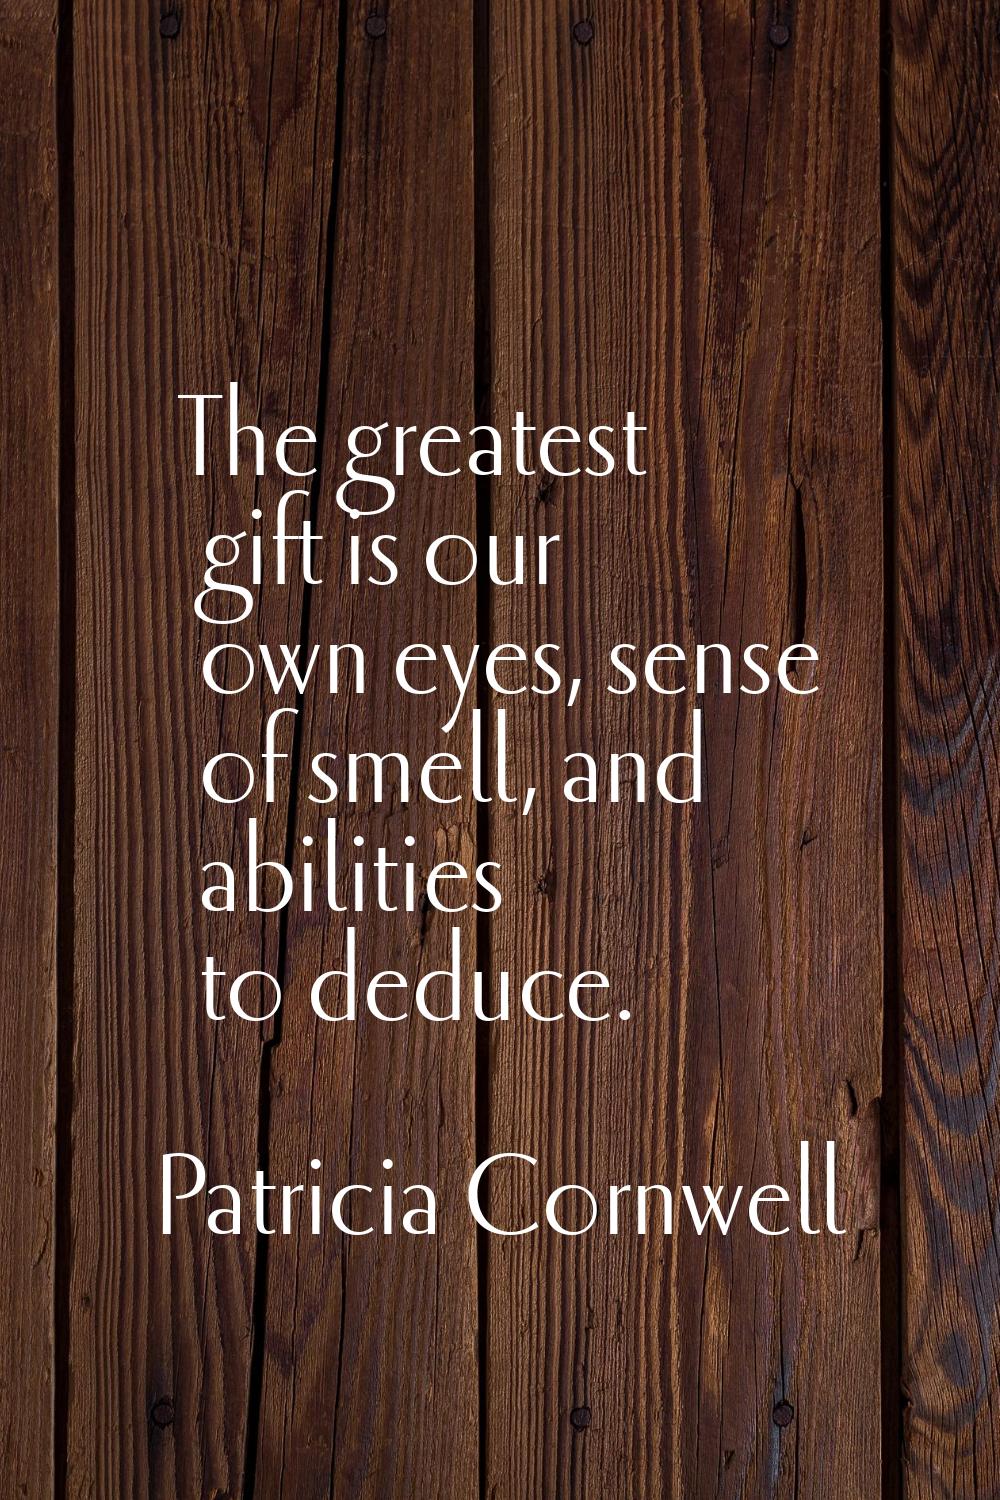 The greatest gift is our own eyes, sense of smell, and abilities to deduce.